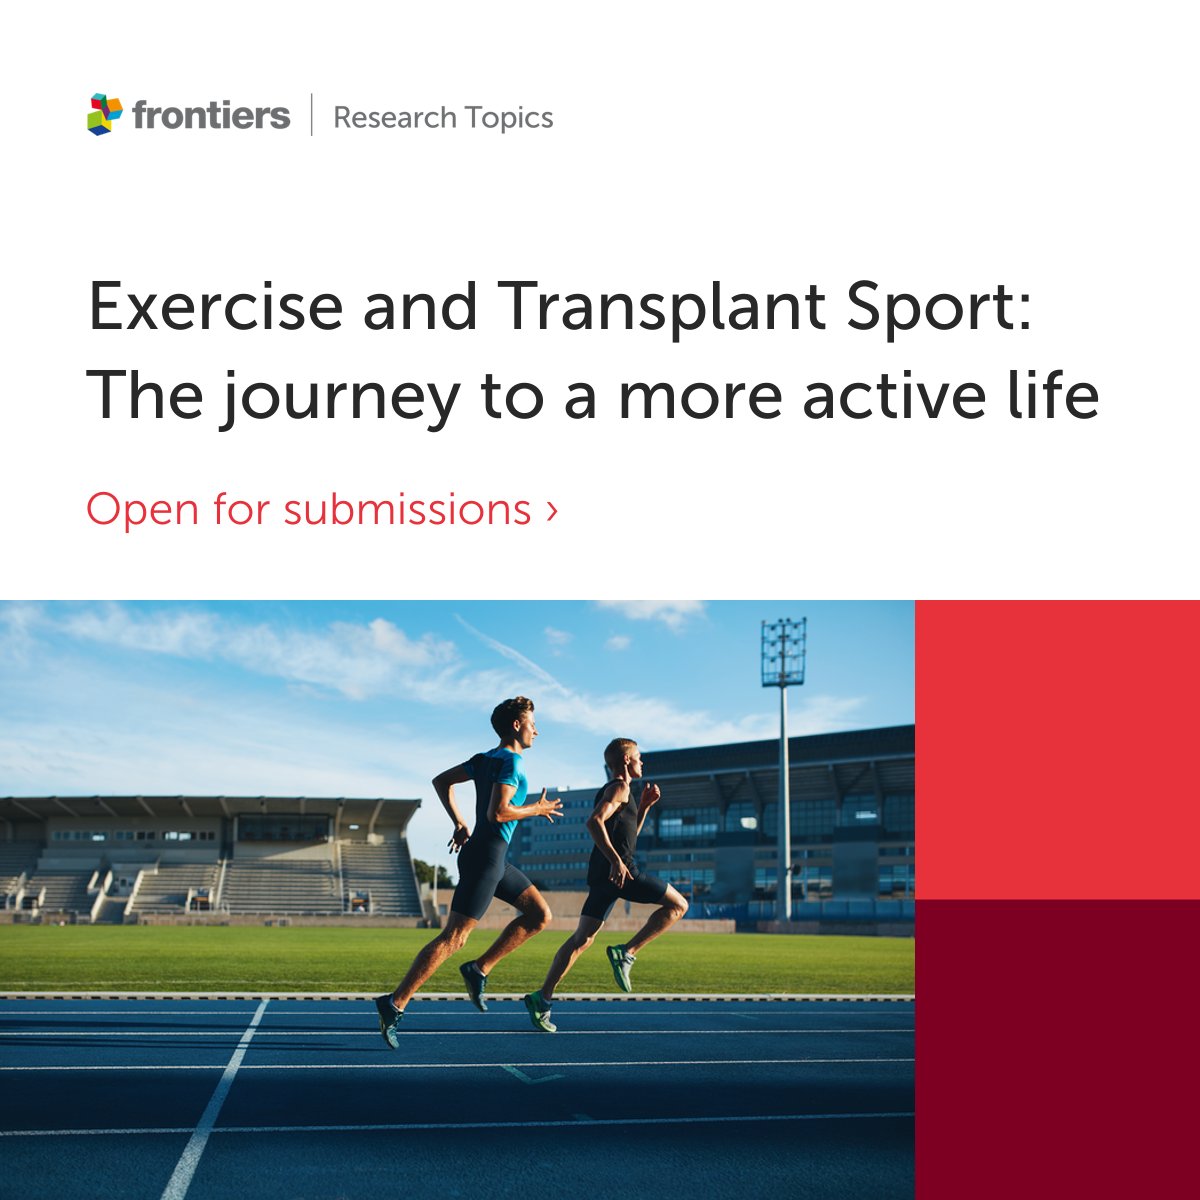 📢Calling for Papers📢 Do you have research in transplant #sport ? Join @JanaudisFerr, @RBillany @Gareth_Wilts and Dr. Mike Price in uncovering the vital role of sport for #transplant recipients in exercise. Together, let's bridge the gaps in knowledge🏃